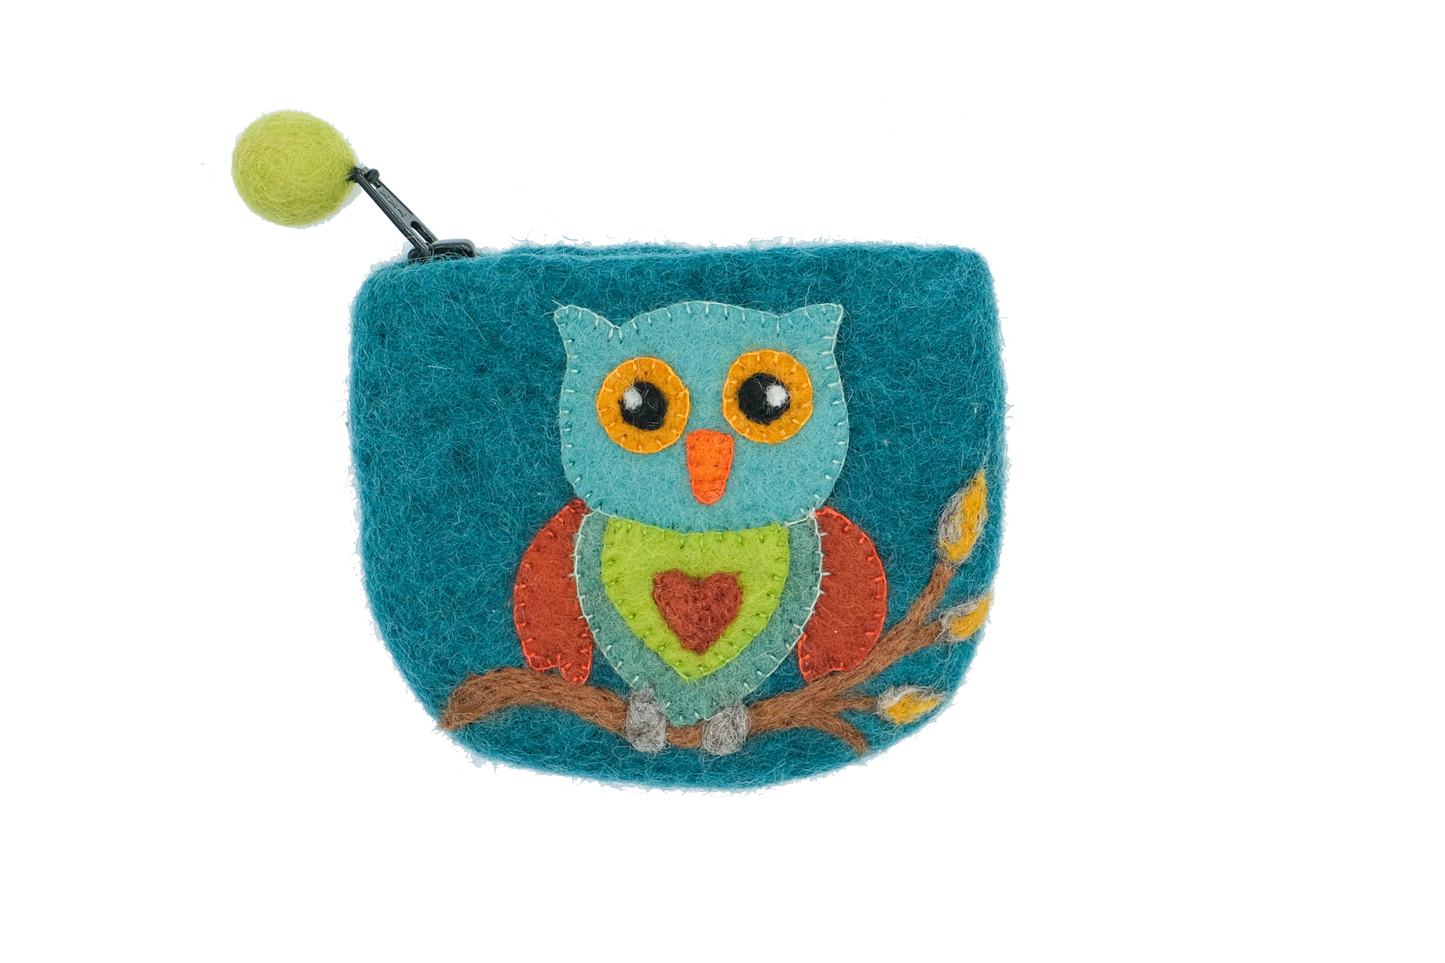 This Global Groove Life, handmade, ethical, fair trade, eco-friendly, sustainable, blue felt zipper coin pouch was created by artisans in Kathmandu Nepal and is adorned with an owl motif.